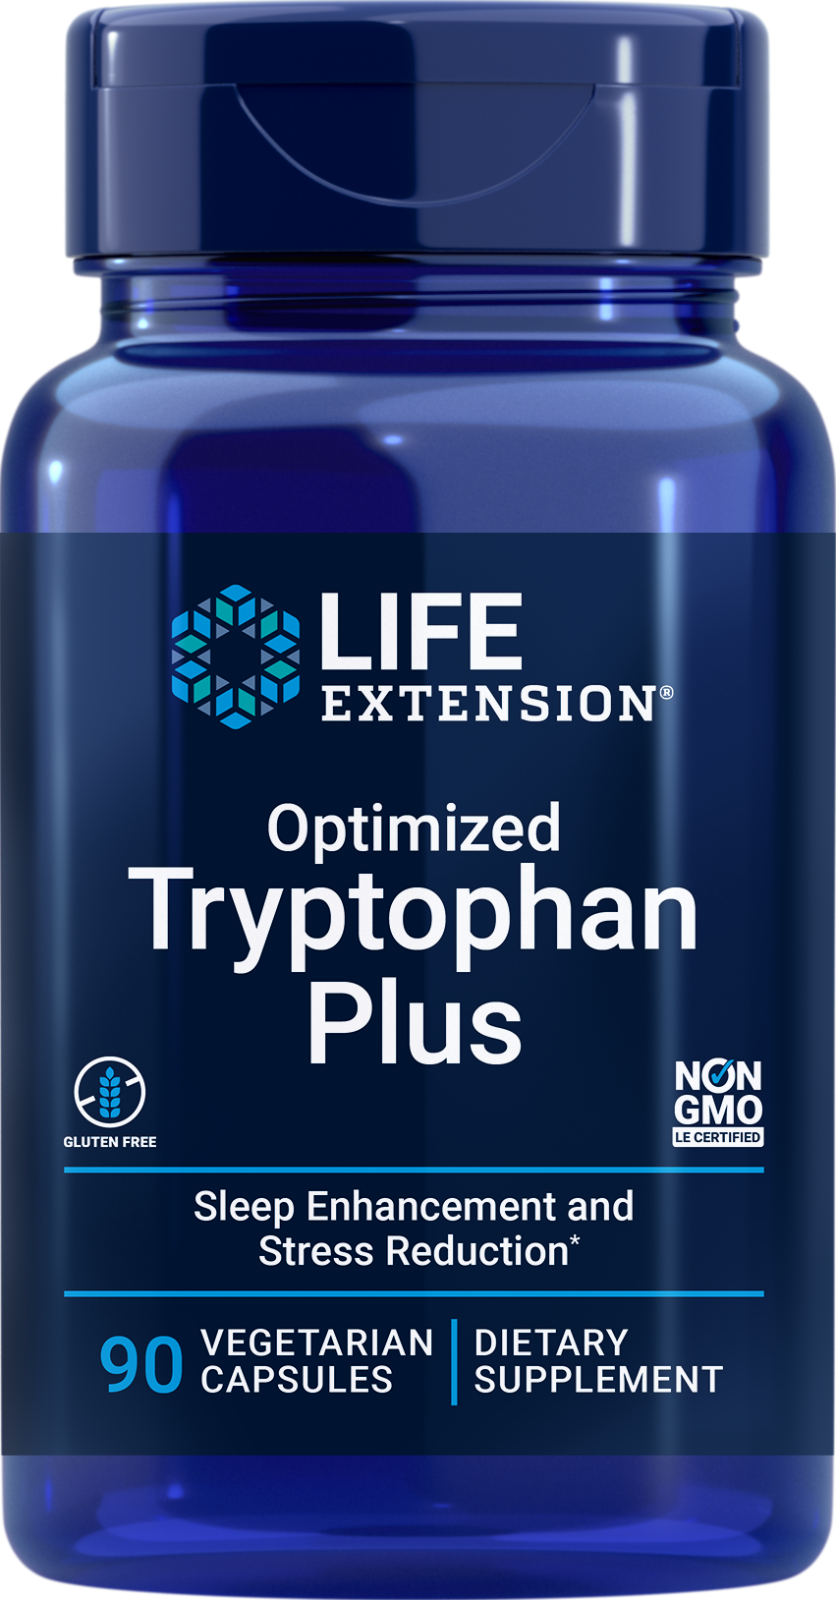 Life Extension Optimized Tryptophan Plus 90 caps L-Tryptophan 1000mg/Niacinamide